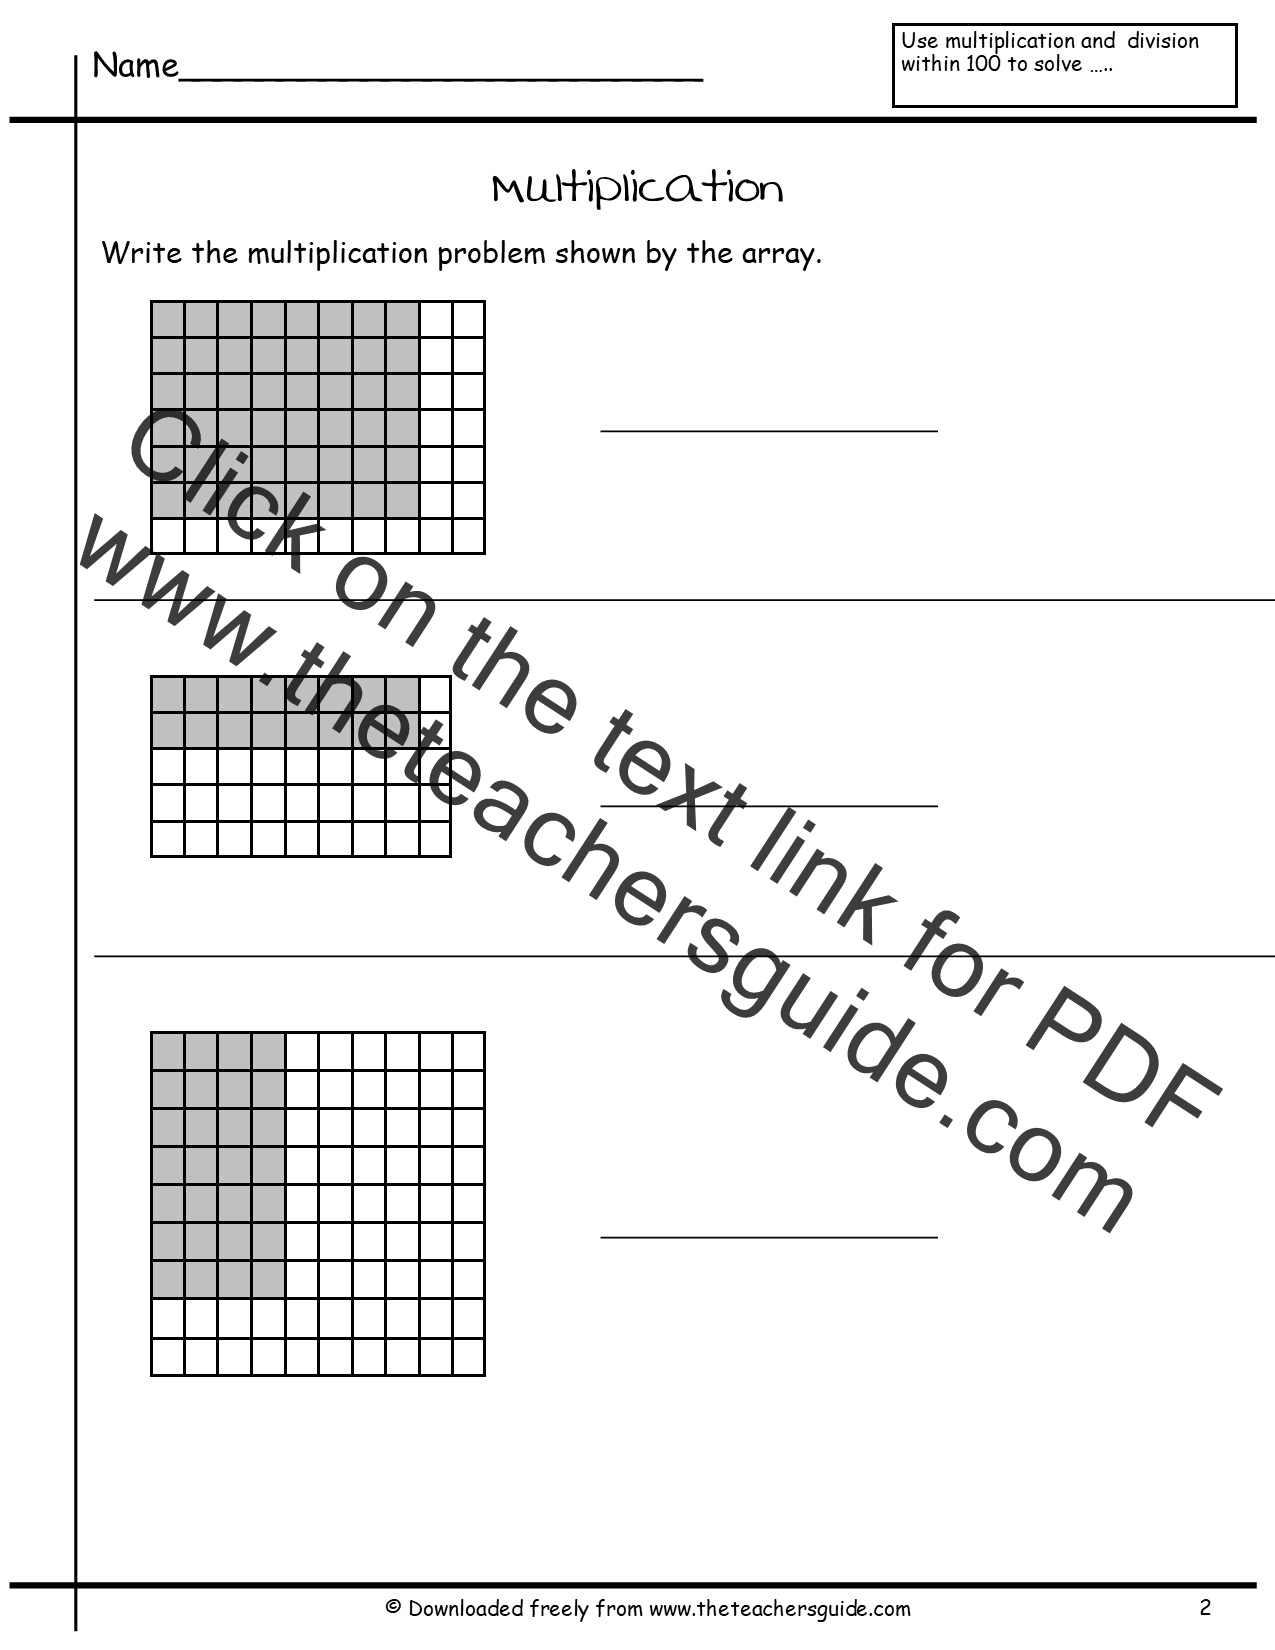 Multiplication Array Worksheets From The Teacher s Guide